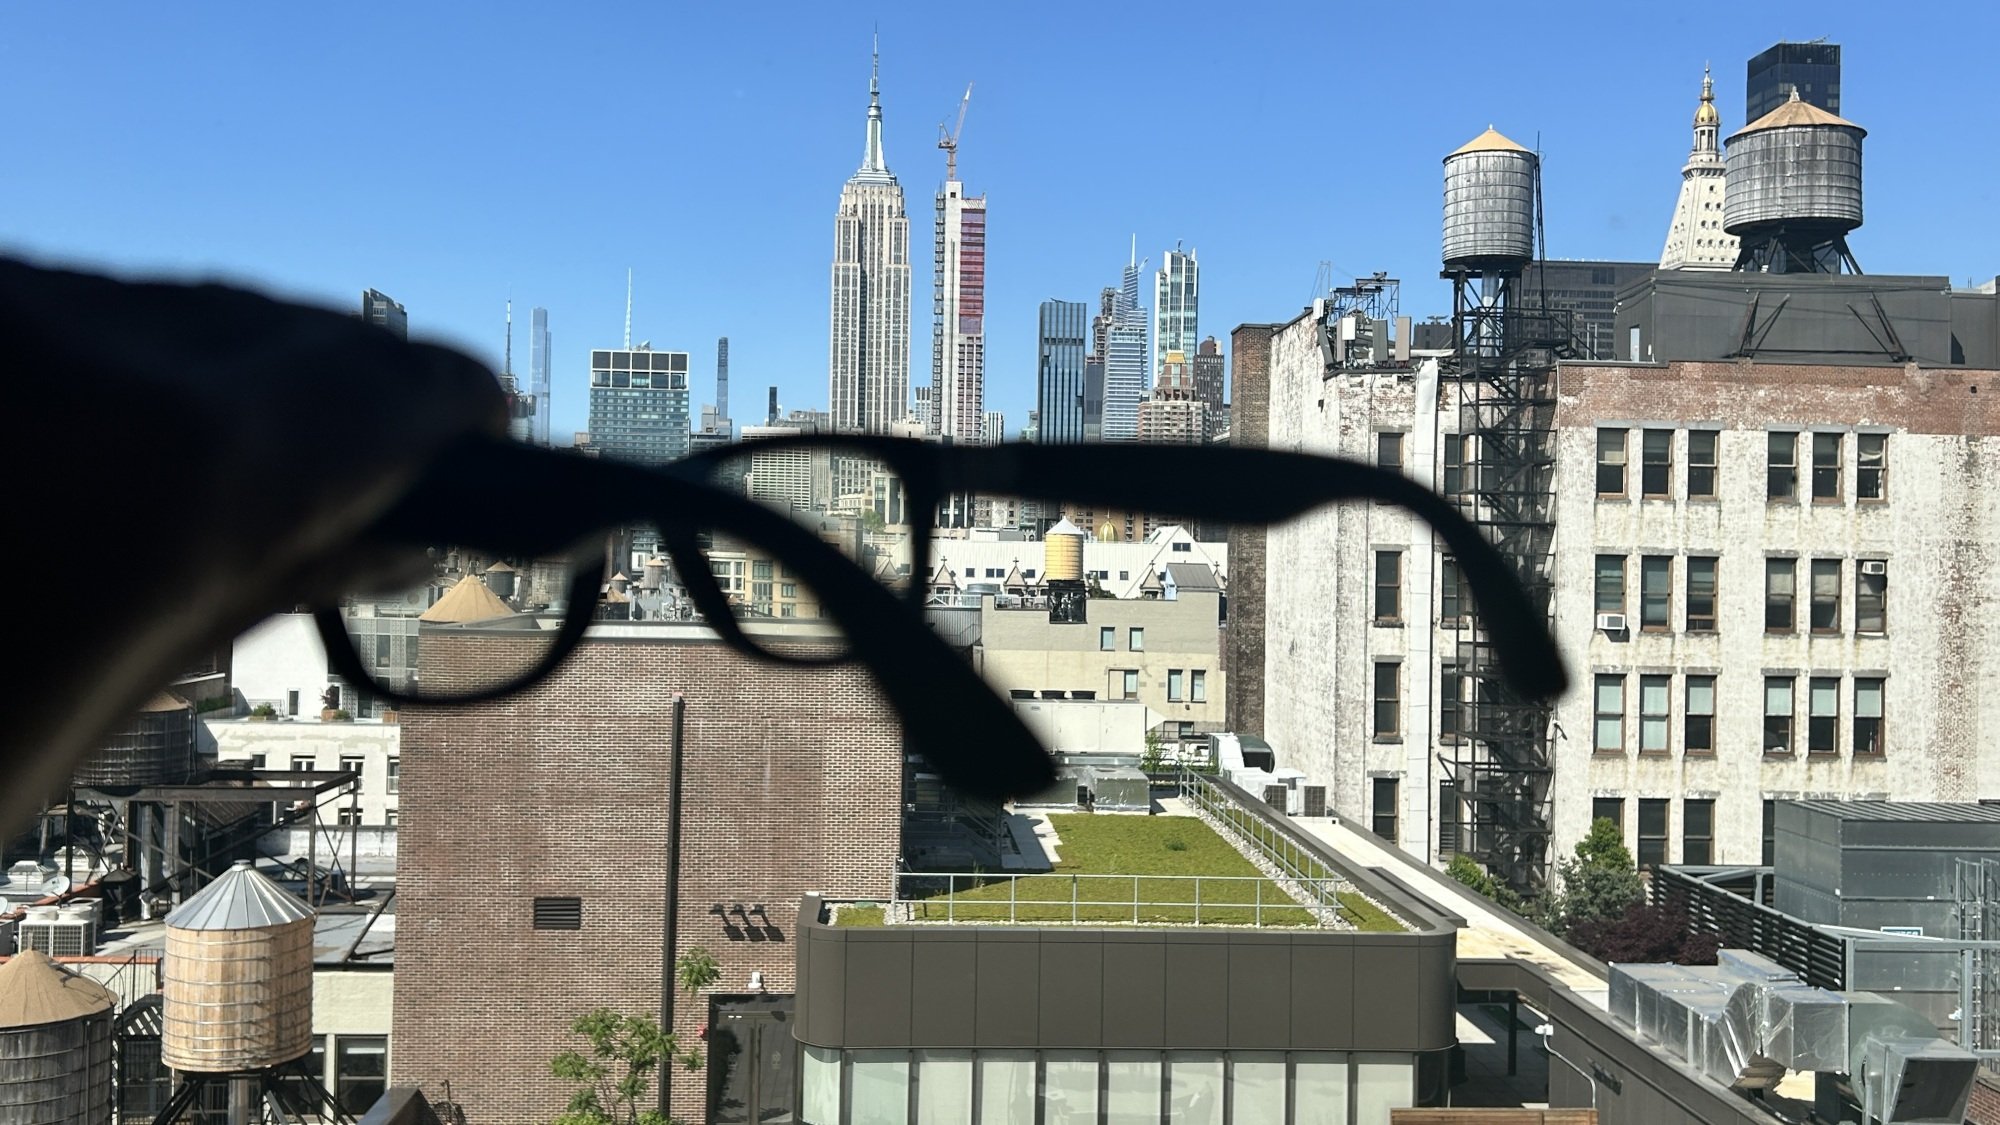 Ray-Ban Meta Smart Glasses in front of Empire State Building